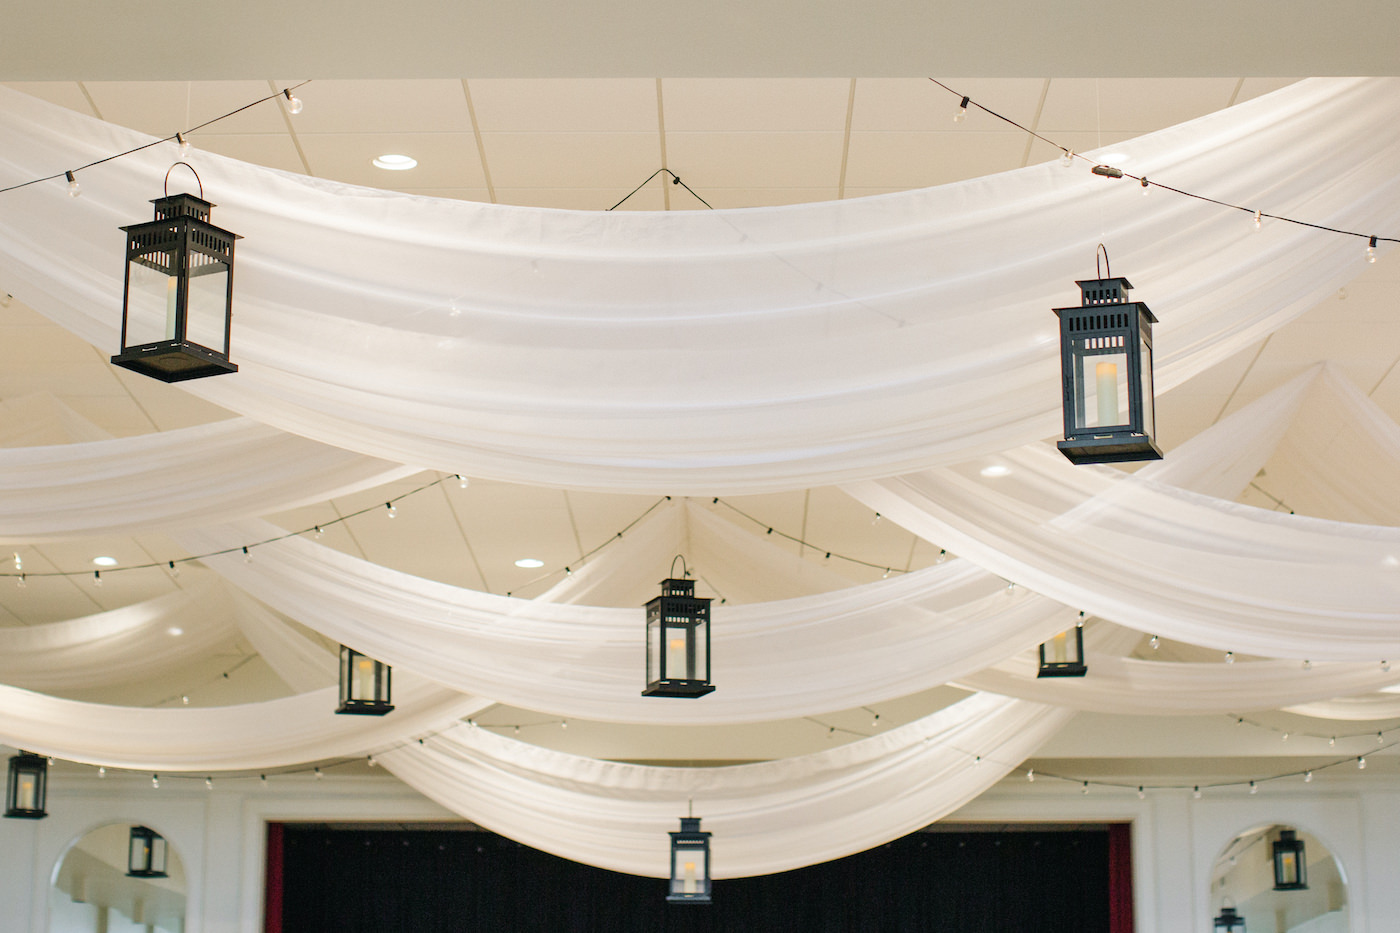 Wedding Ceiling Treatment Installment with Draped Fabric Swags and Canopy Bistro Lights and Suspended Black Lanterns with LED Candles | Tampa Wedding Rentals Gabro Event Services